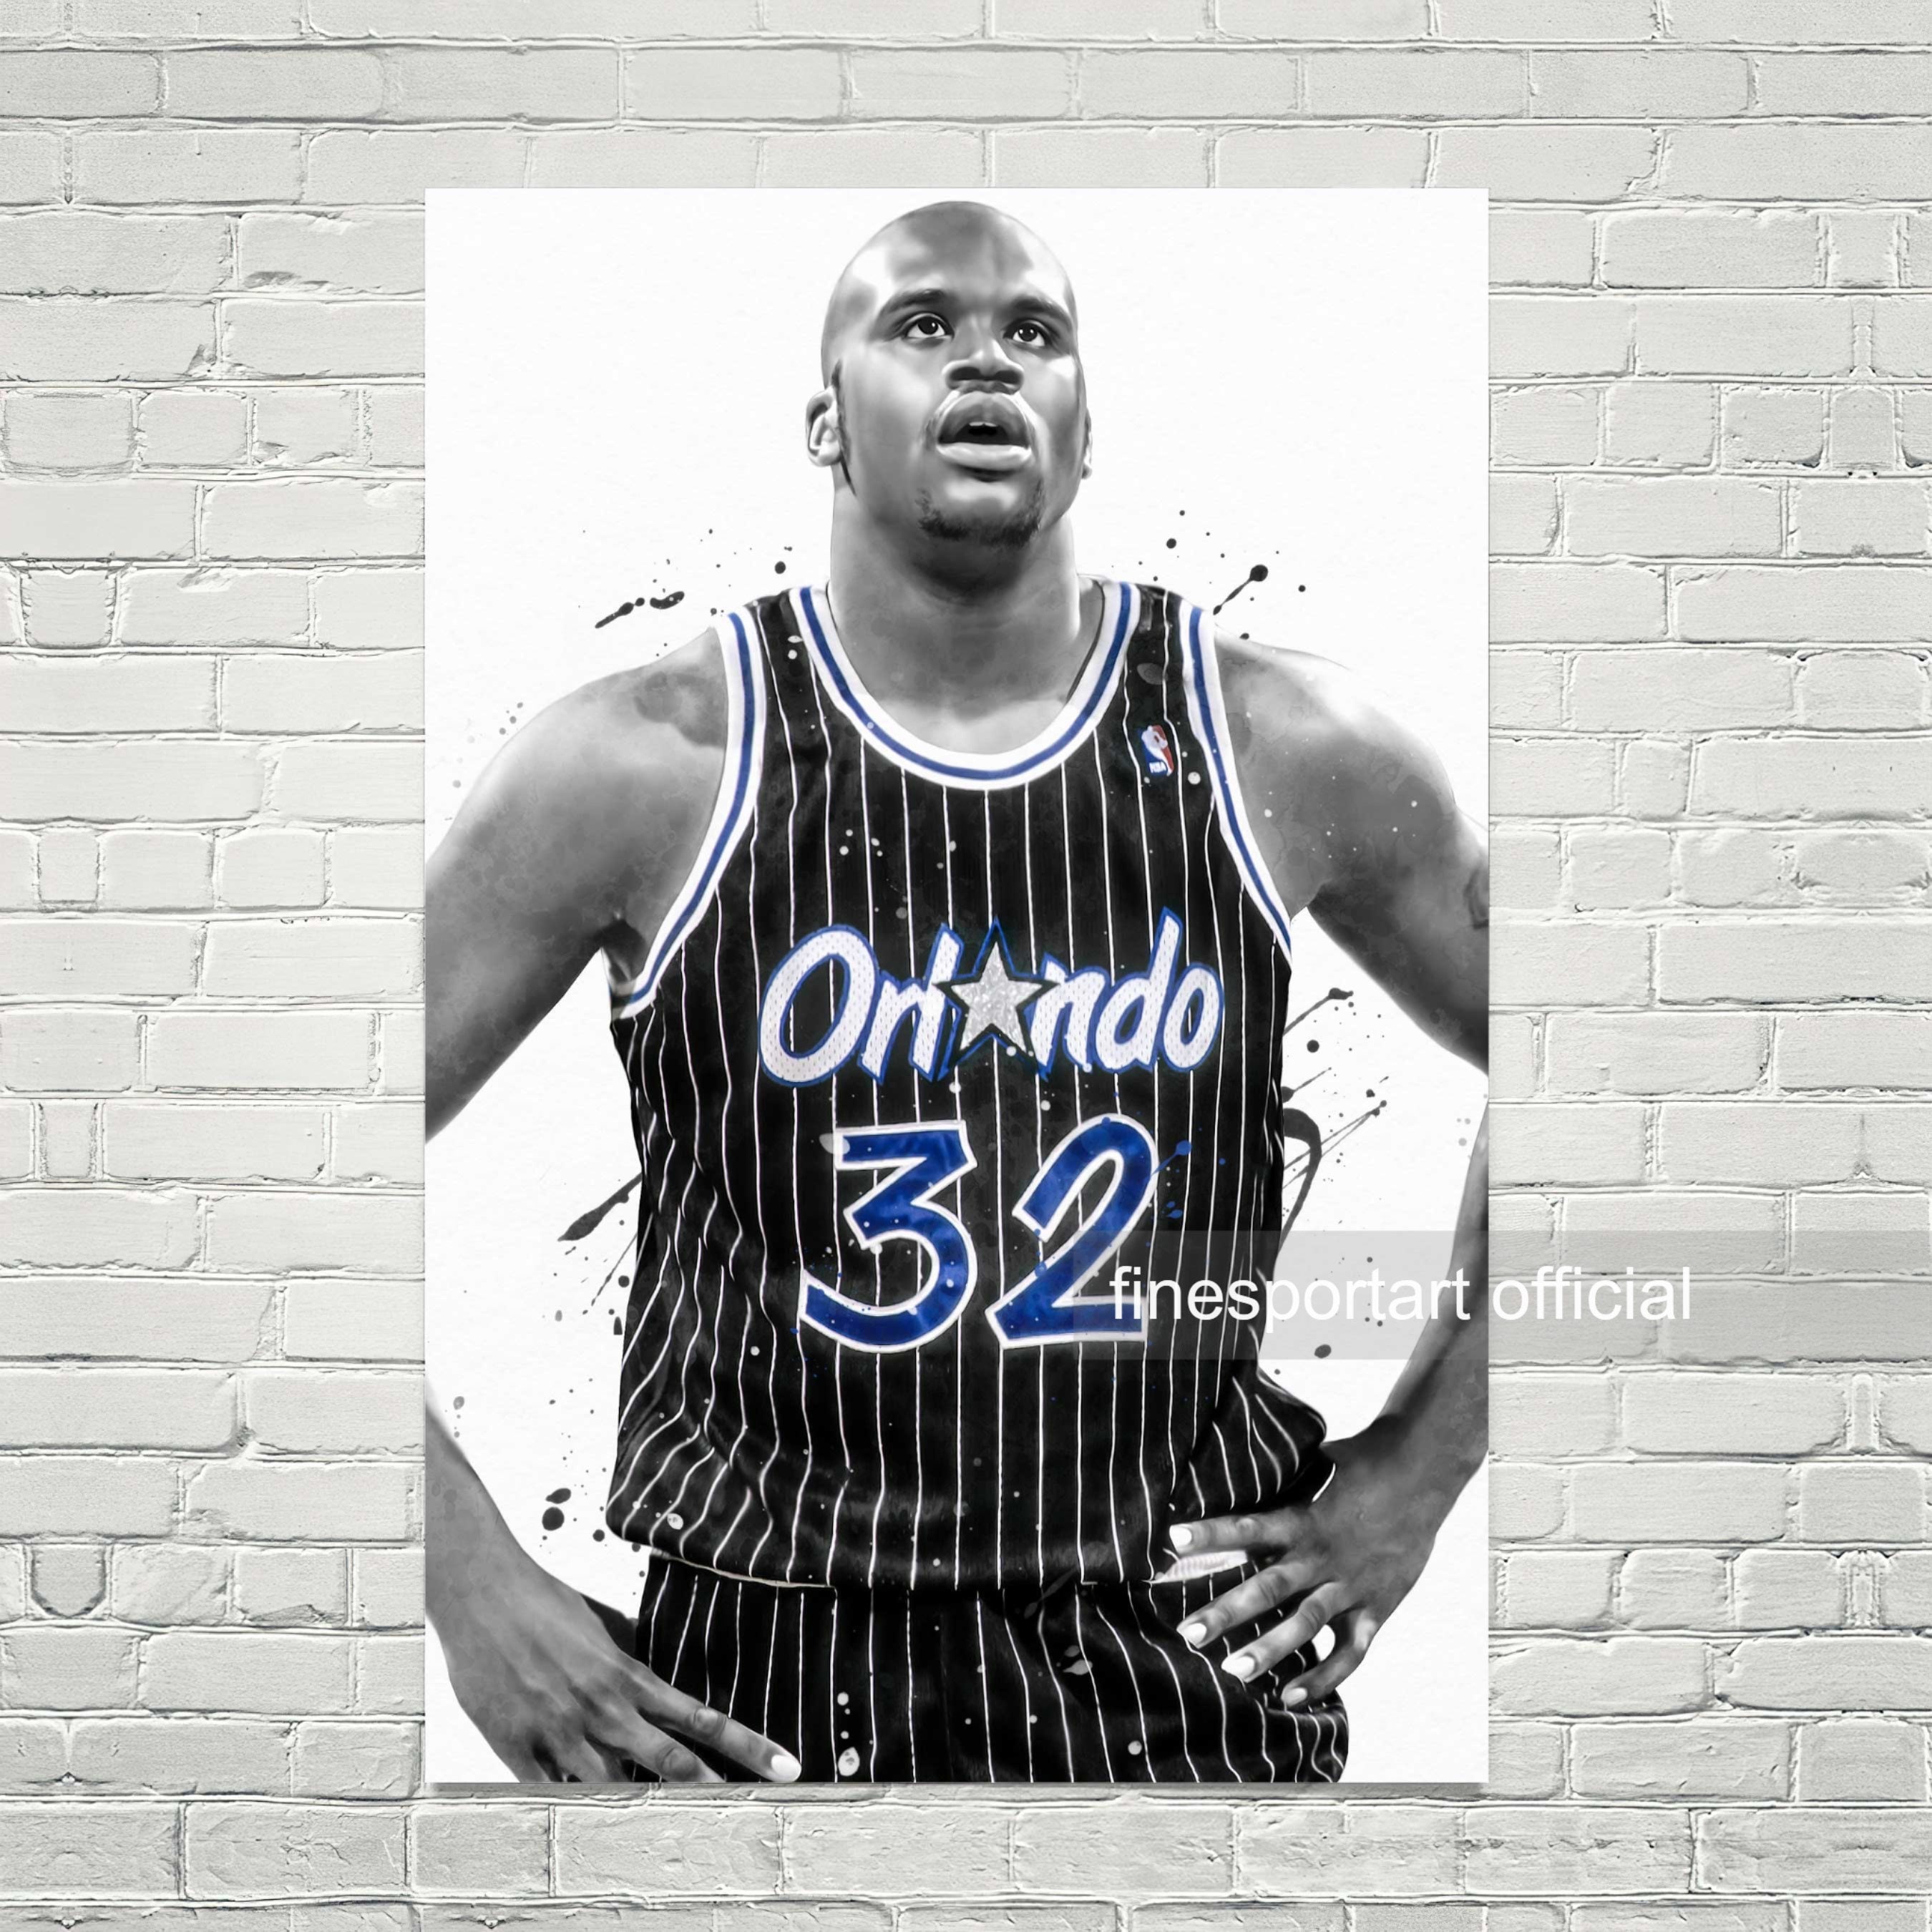  Jermaine O'Neal Poster USA American Basketball Player Dream  Team Star Artworks Canvas Poster Room Aesthetic Wall Art Prints Home Modern  Decor Gifts Framed-unframed 12x12inch(30x30cm): Posters & Prints